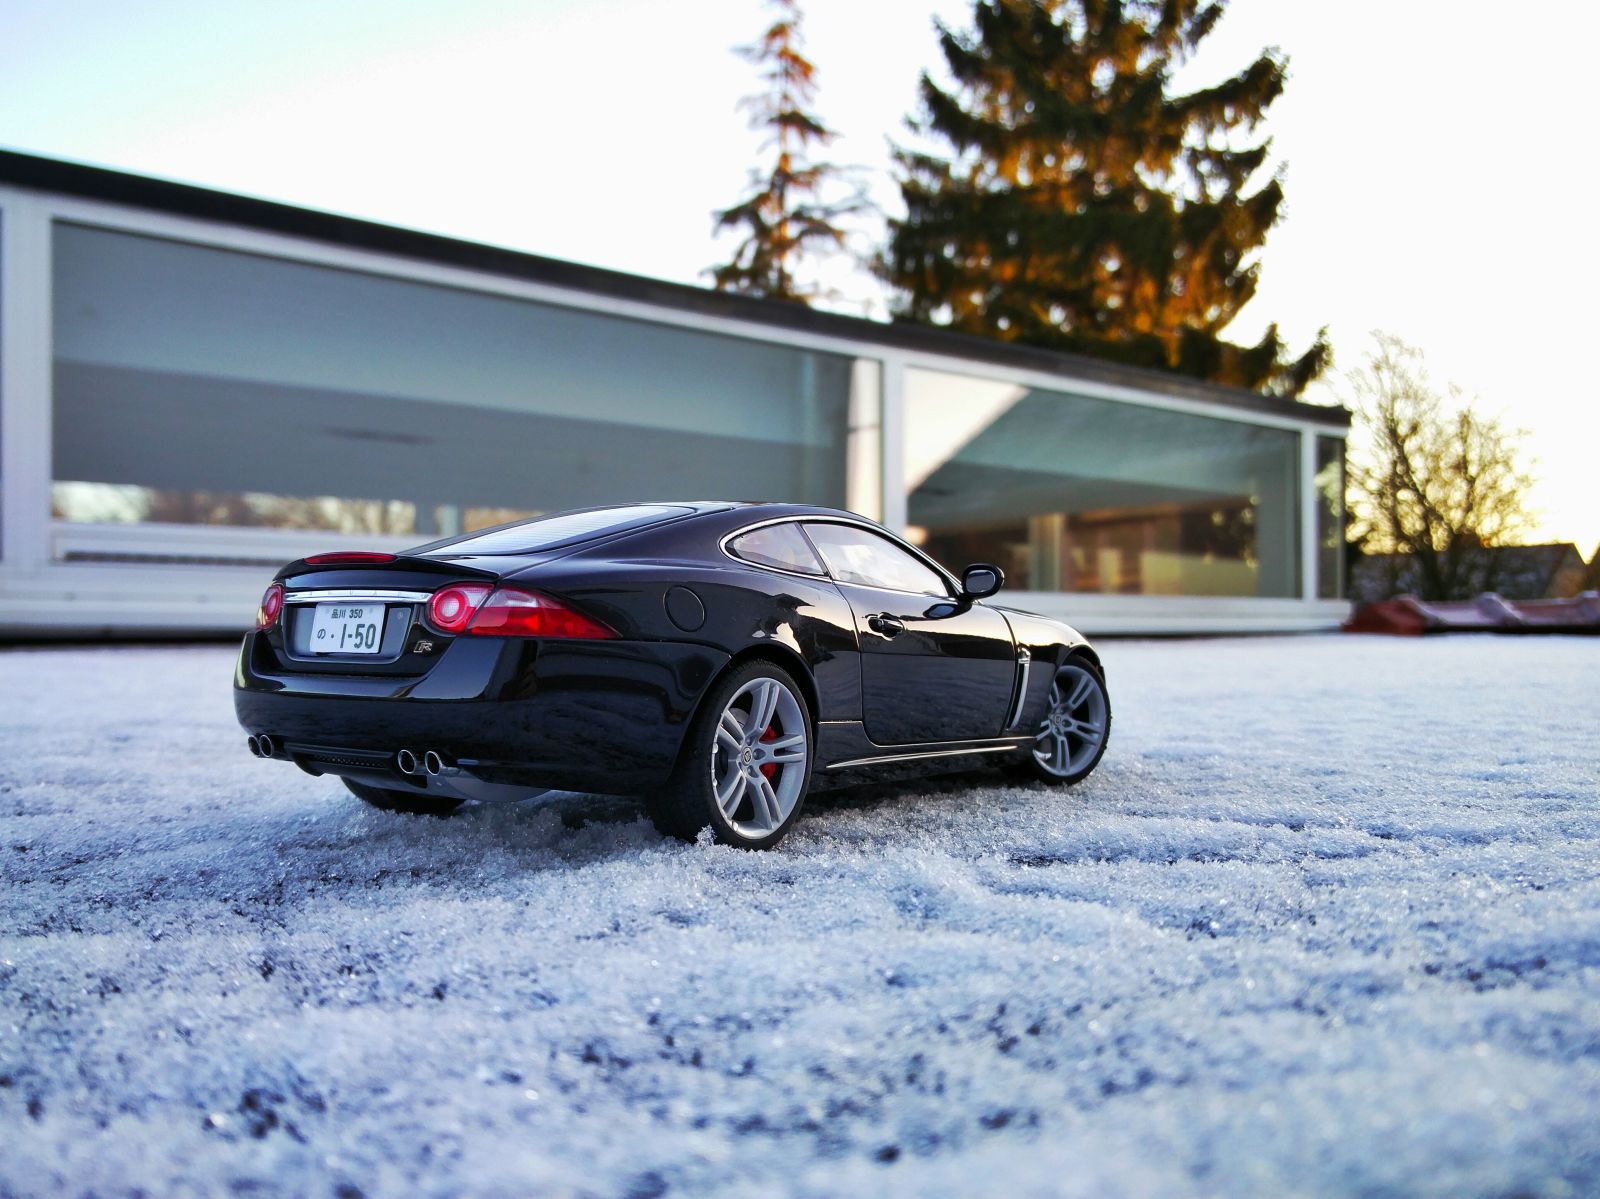 Illustration for article titled Cool as frost: The Jaguar XKR - 1:18 Autoart